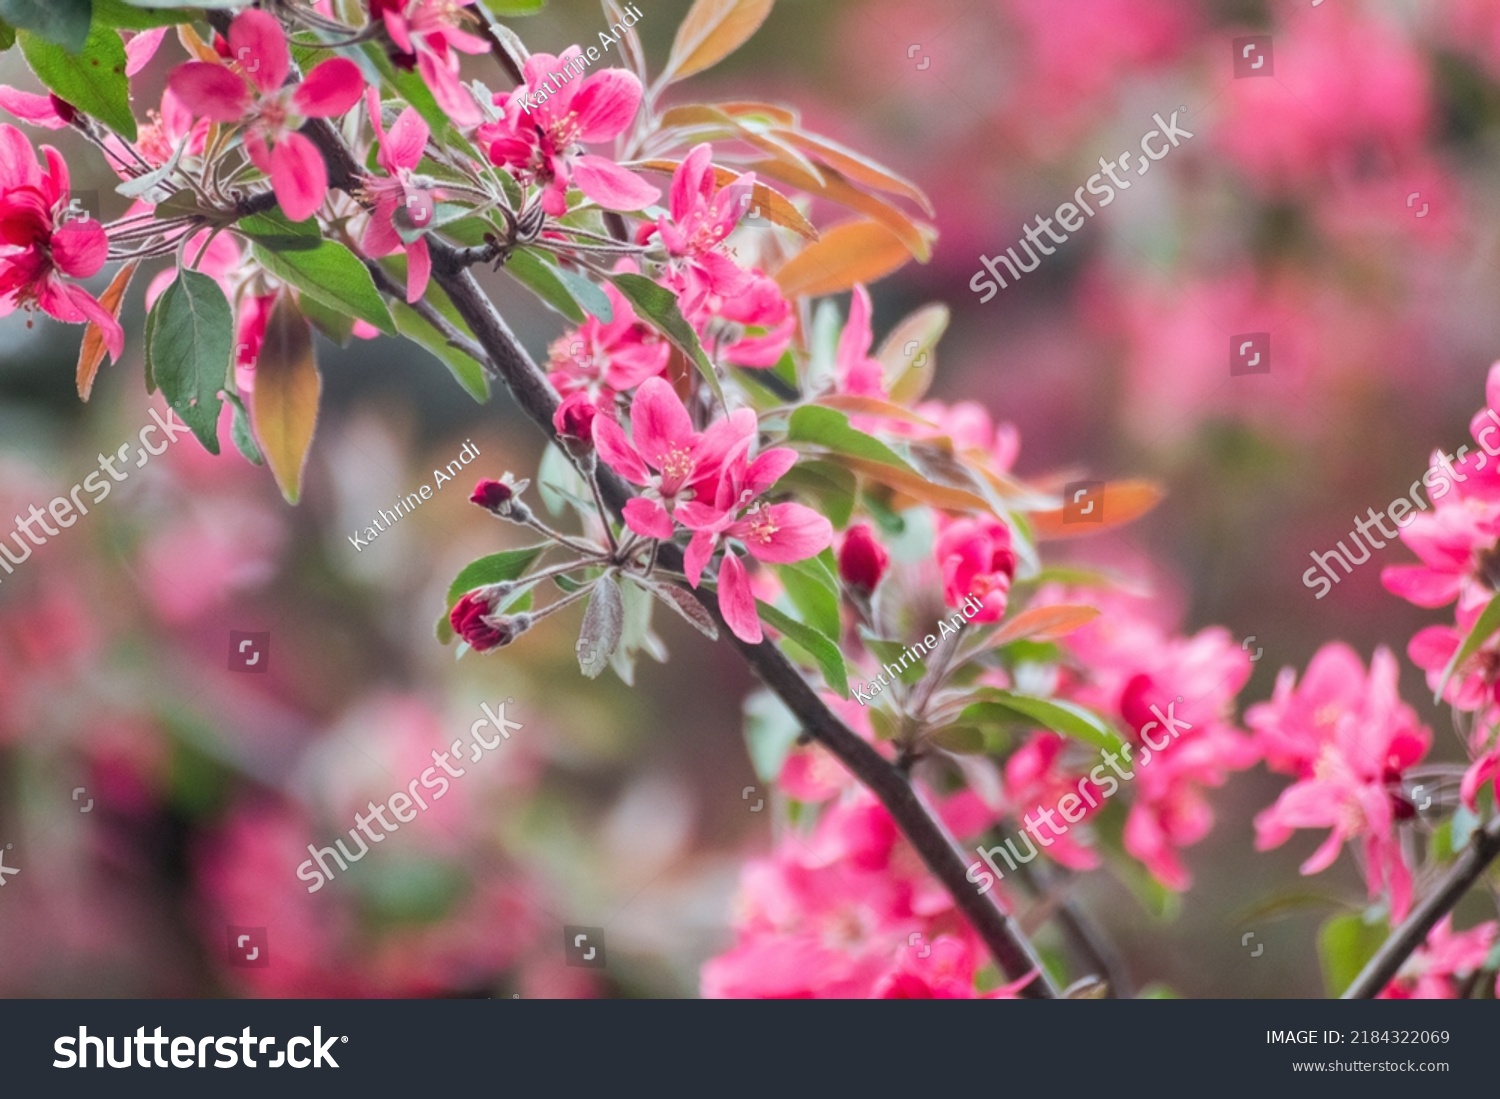 Pink apple tree blossom, big flowers on branch. Apple tree spring delicate vibrant pink flowers bloom in garden close-up with blurred background #2184322069